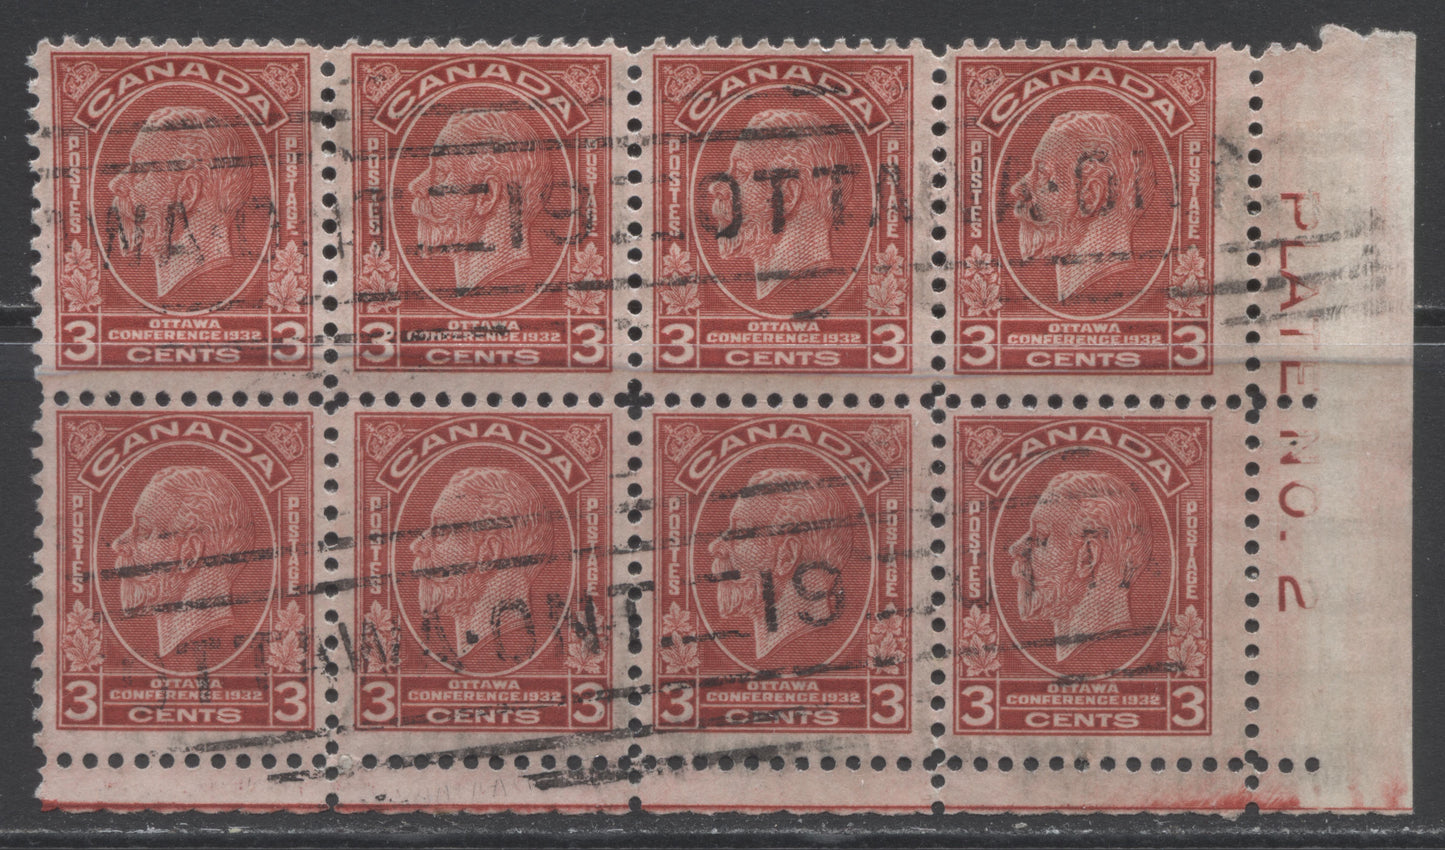 Lot 129 Canada #192i 3c Deep Red King George V, 1932 Imperial Economic Conference Issue, A Fine Used LR Plate 2 Block Of 8 Showing The Broken E Variety